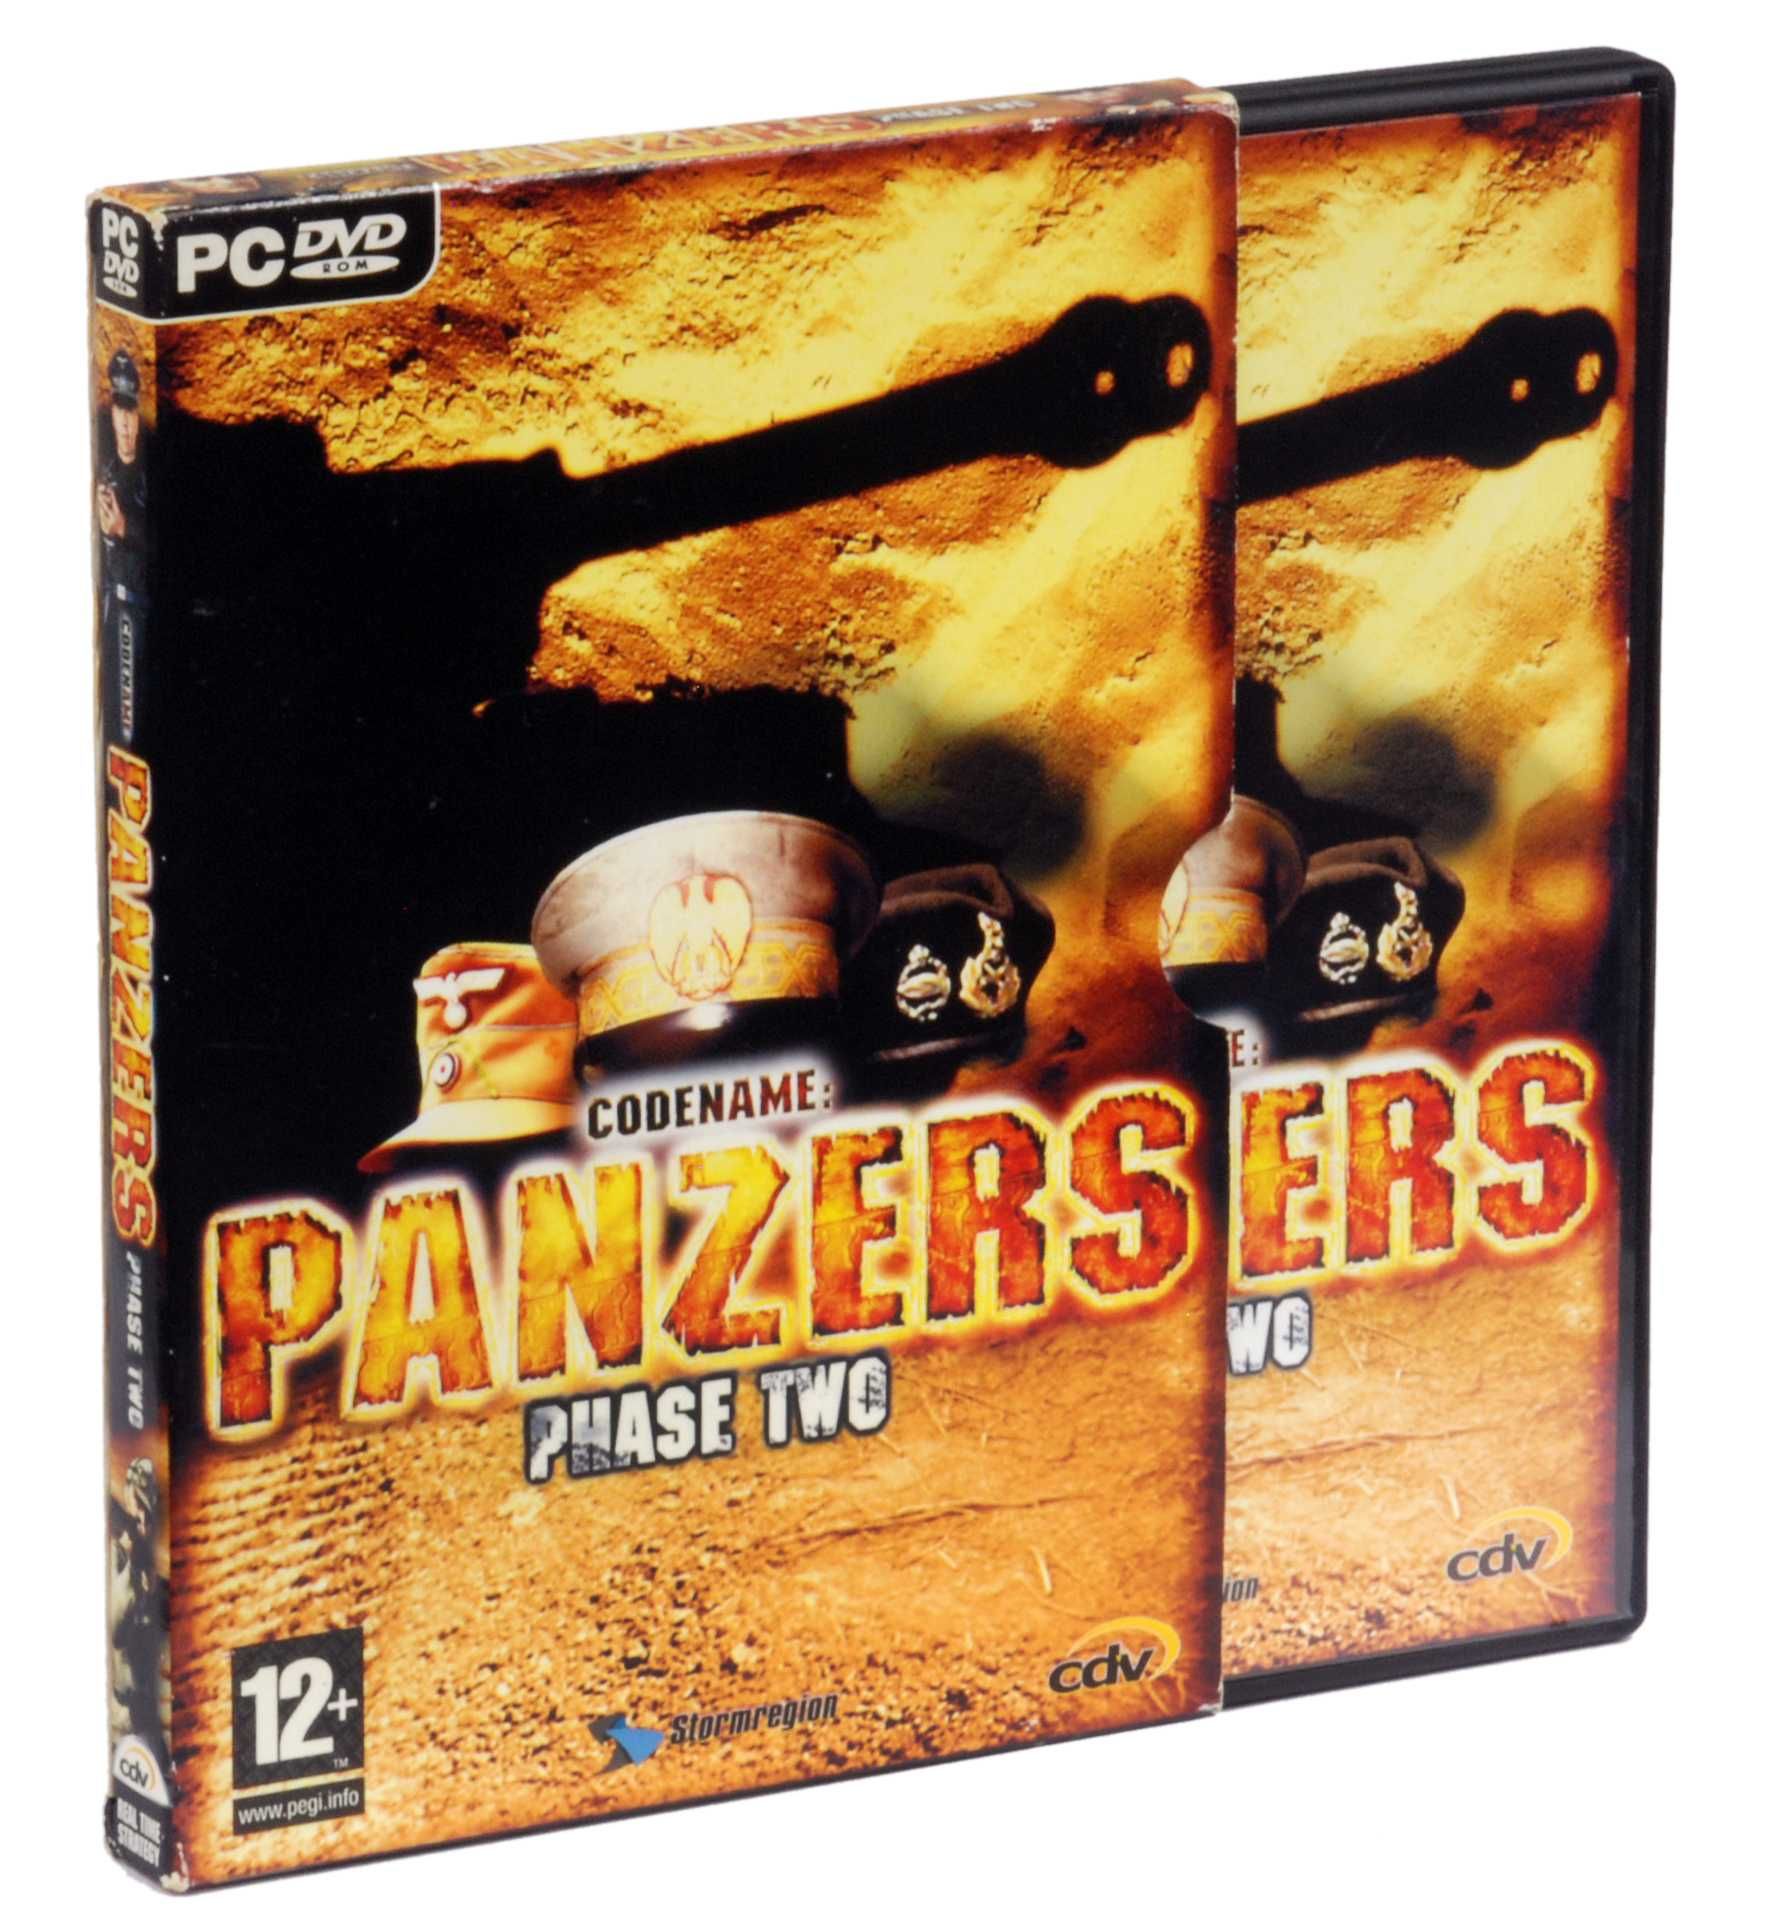 Codename: Panzers - Phase Two PC